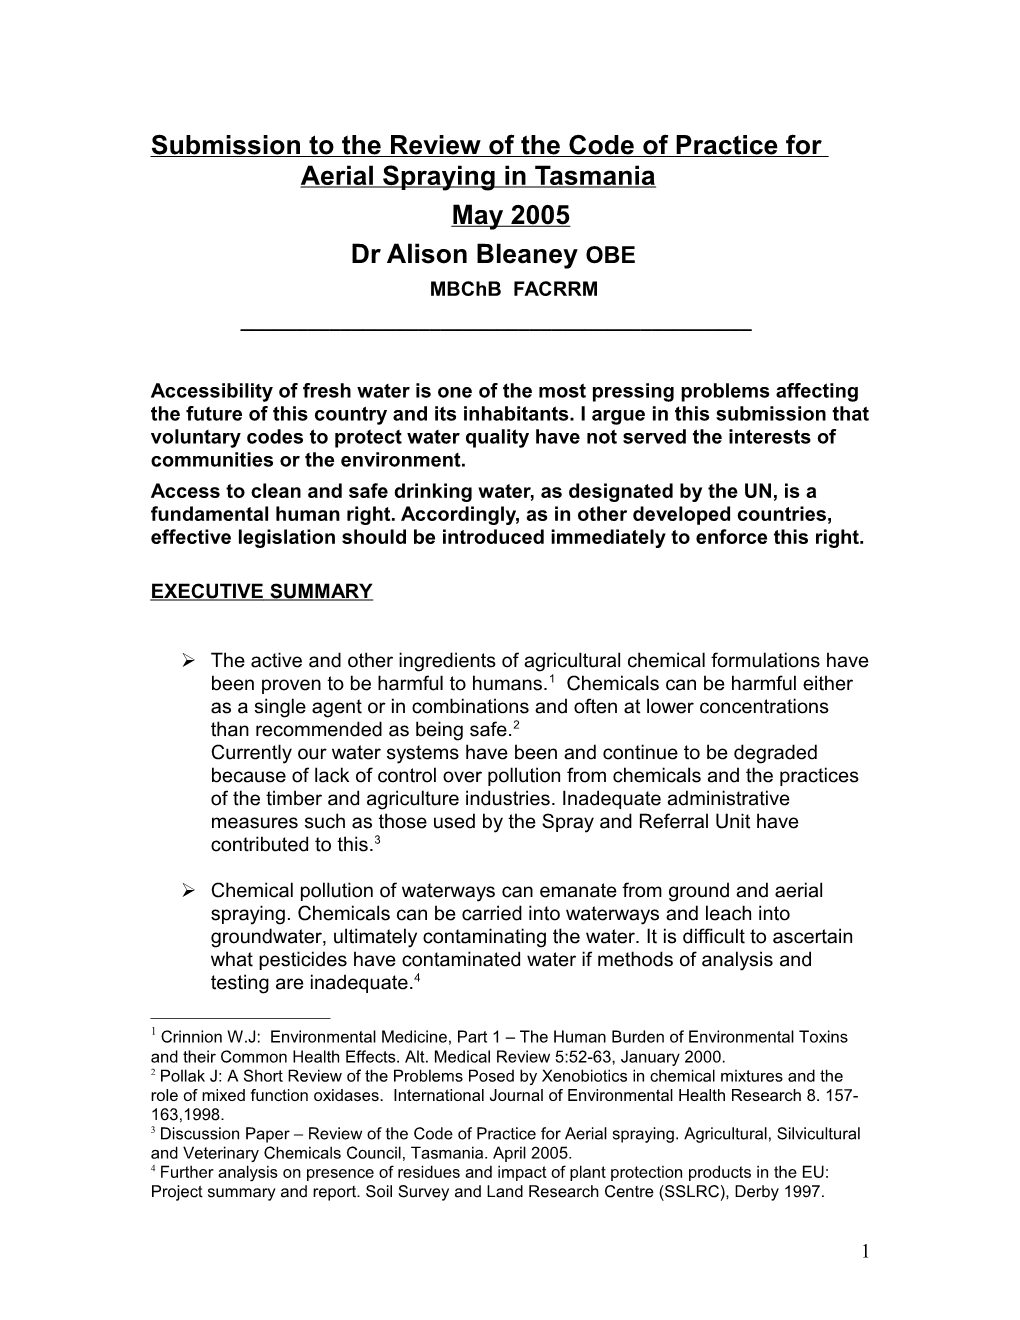 Review of the Code of Practice for Aerial Spraying Tasmania, April 2005